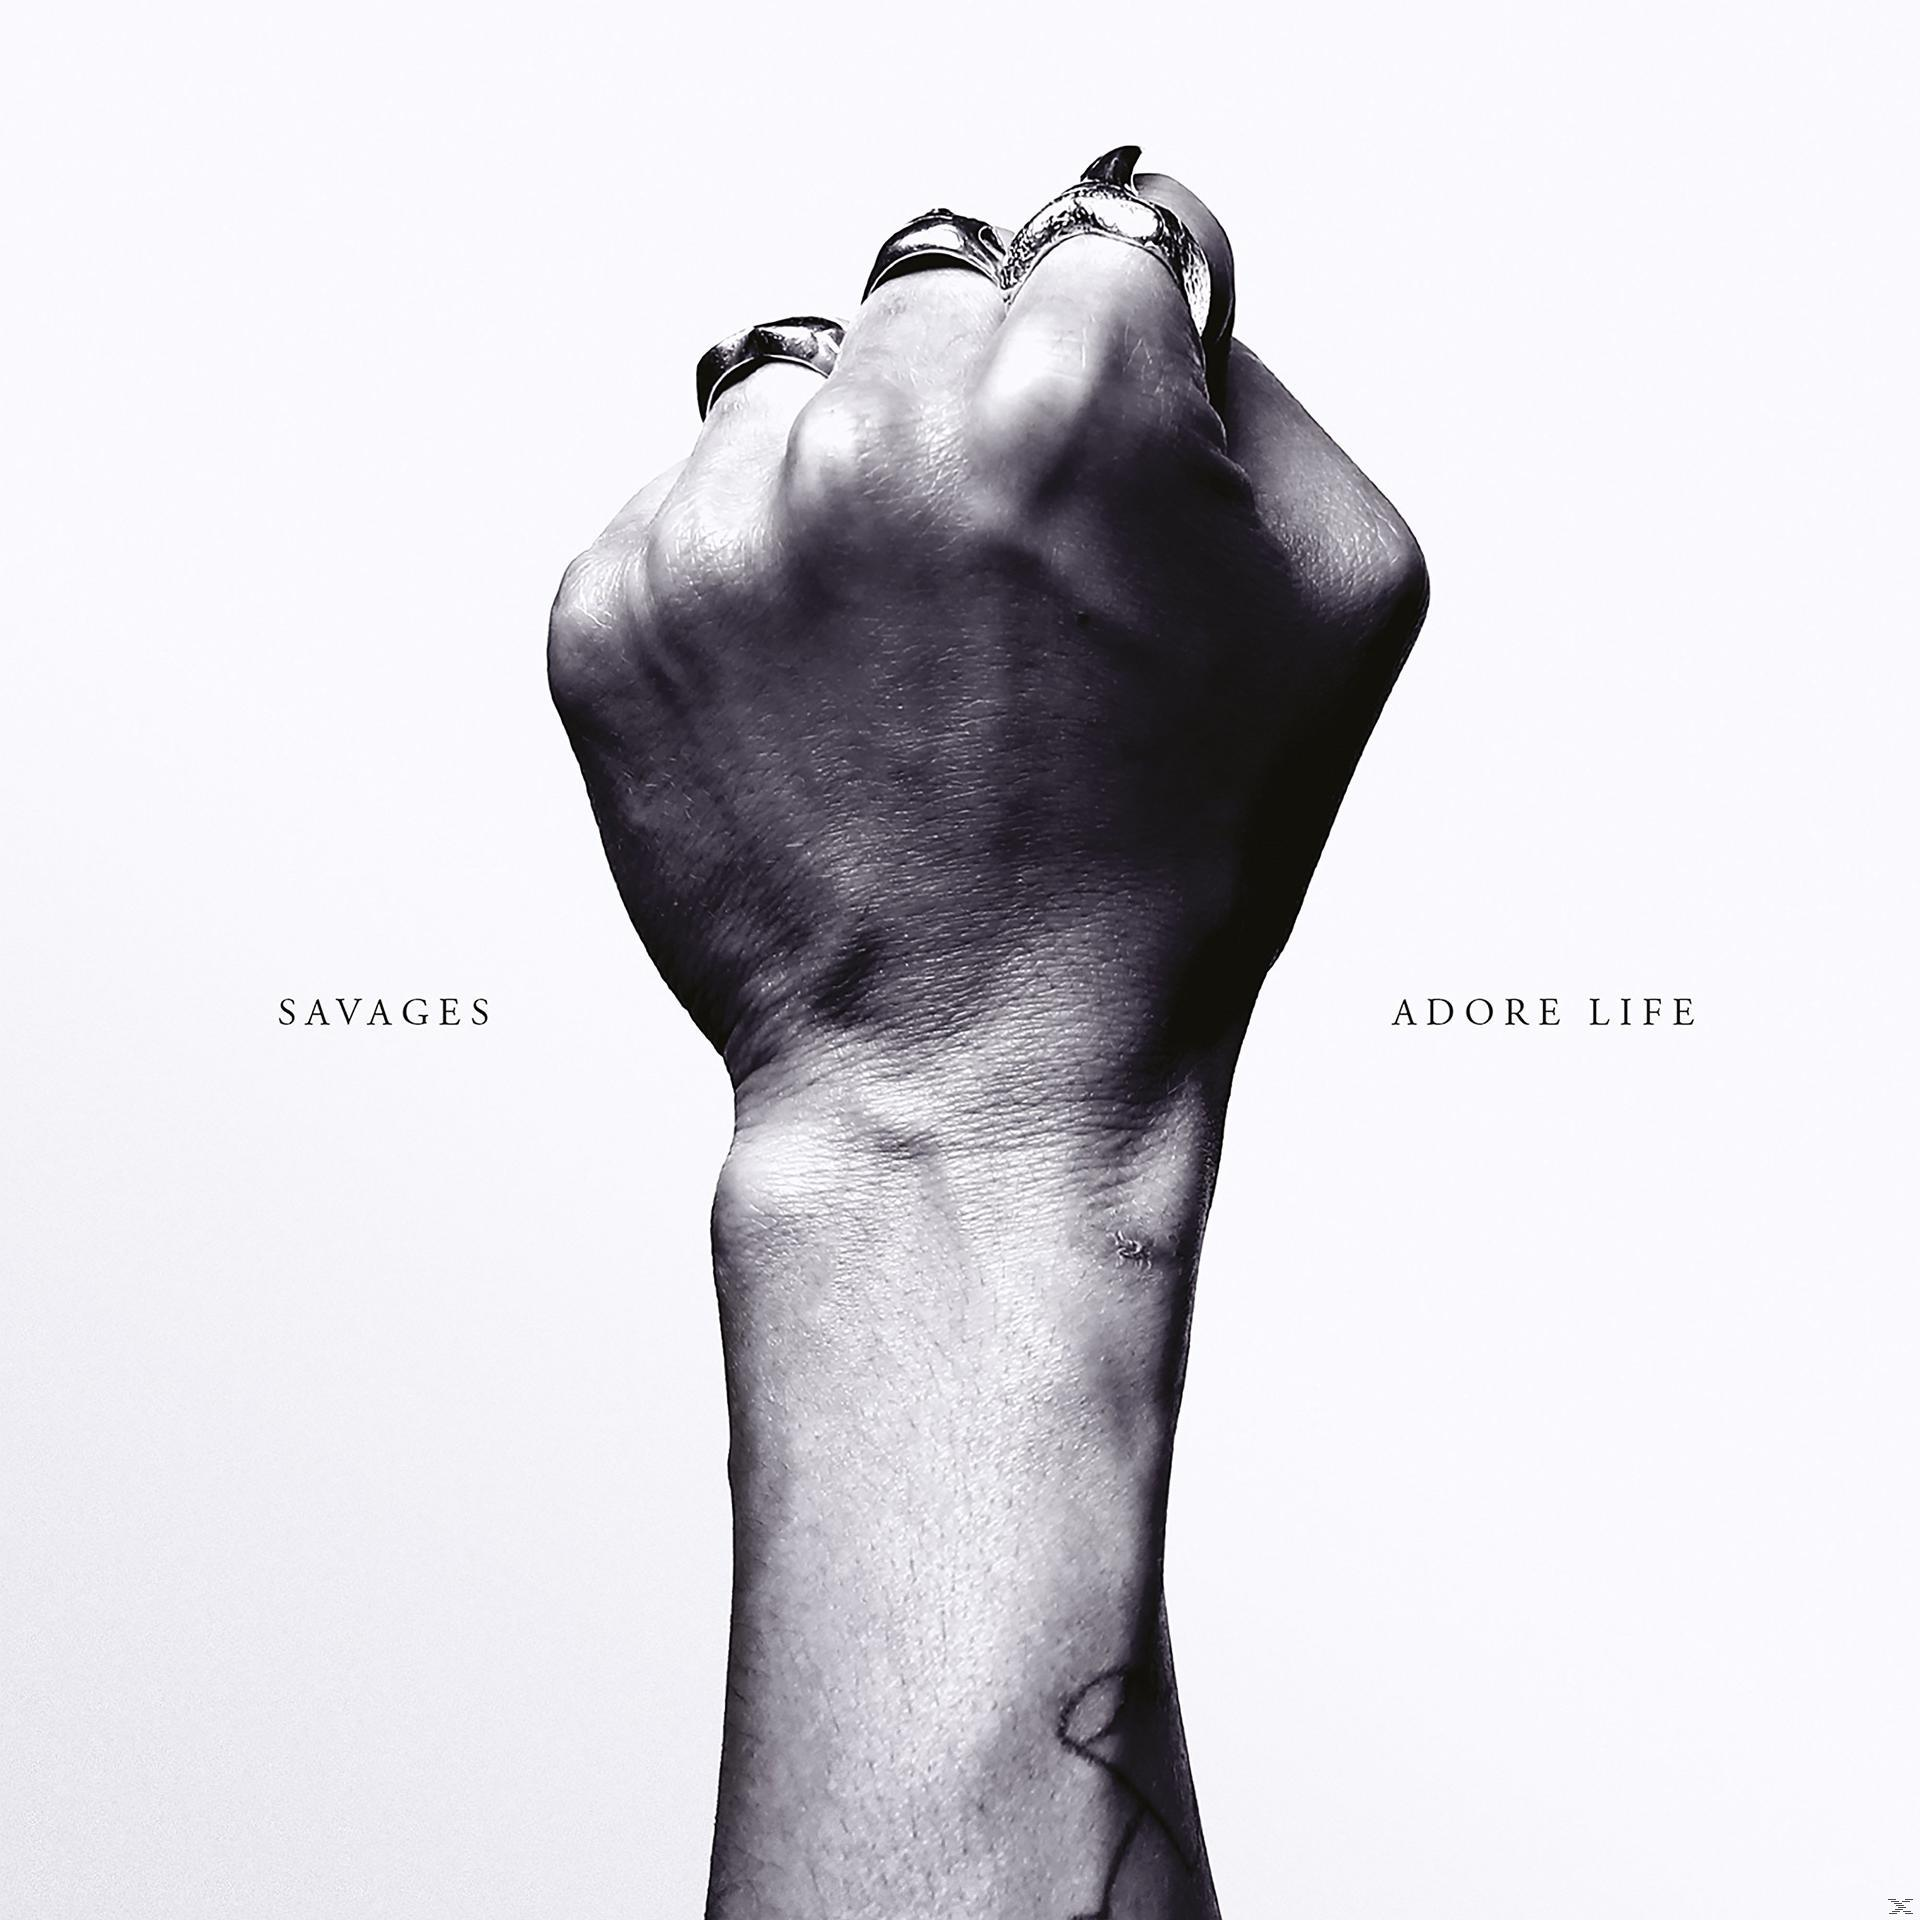 Download) - Savages + (LP - Life Adore The